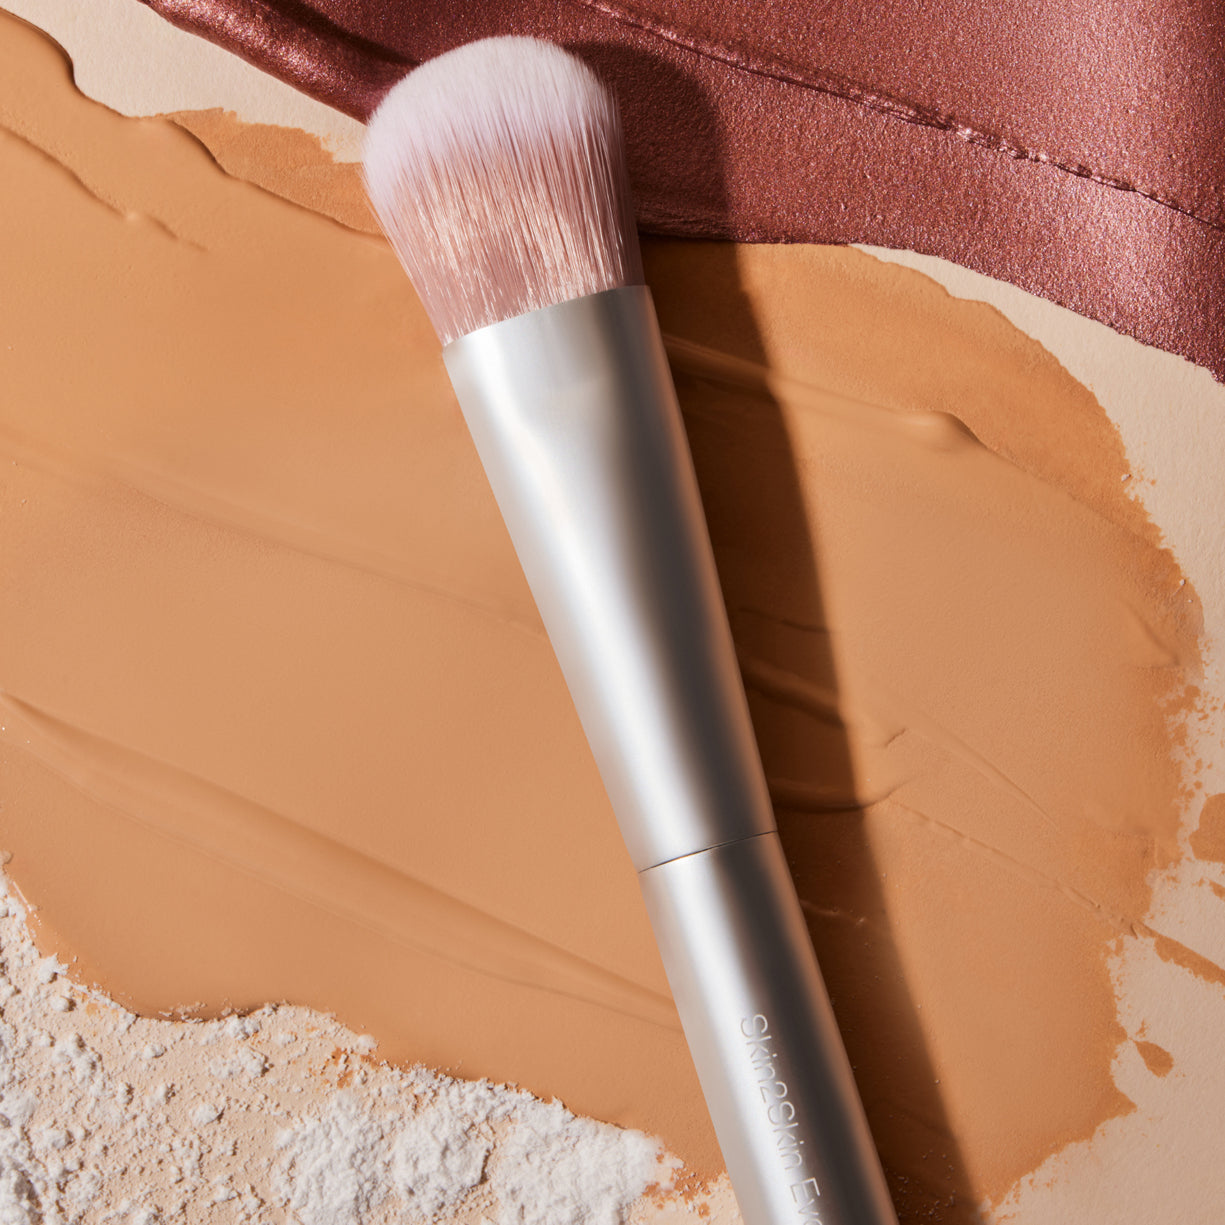 A Beginners Guide to Using Makeup Brushes: What You Need to Know